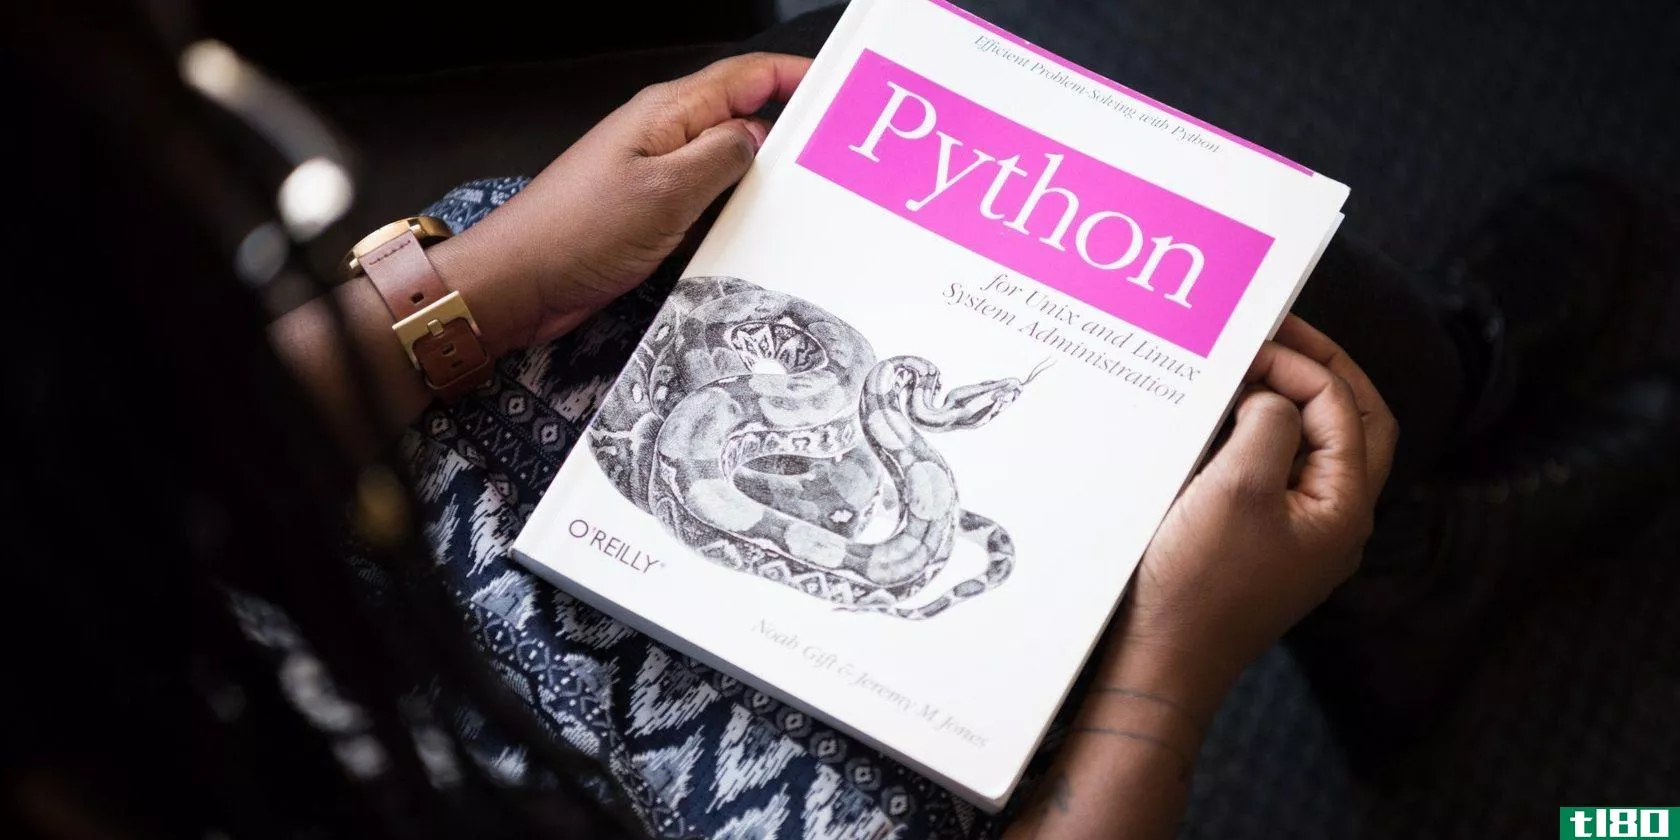 Holding a Python guide book